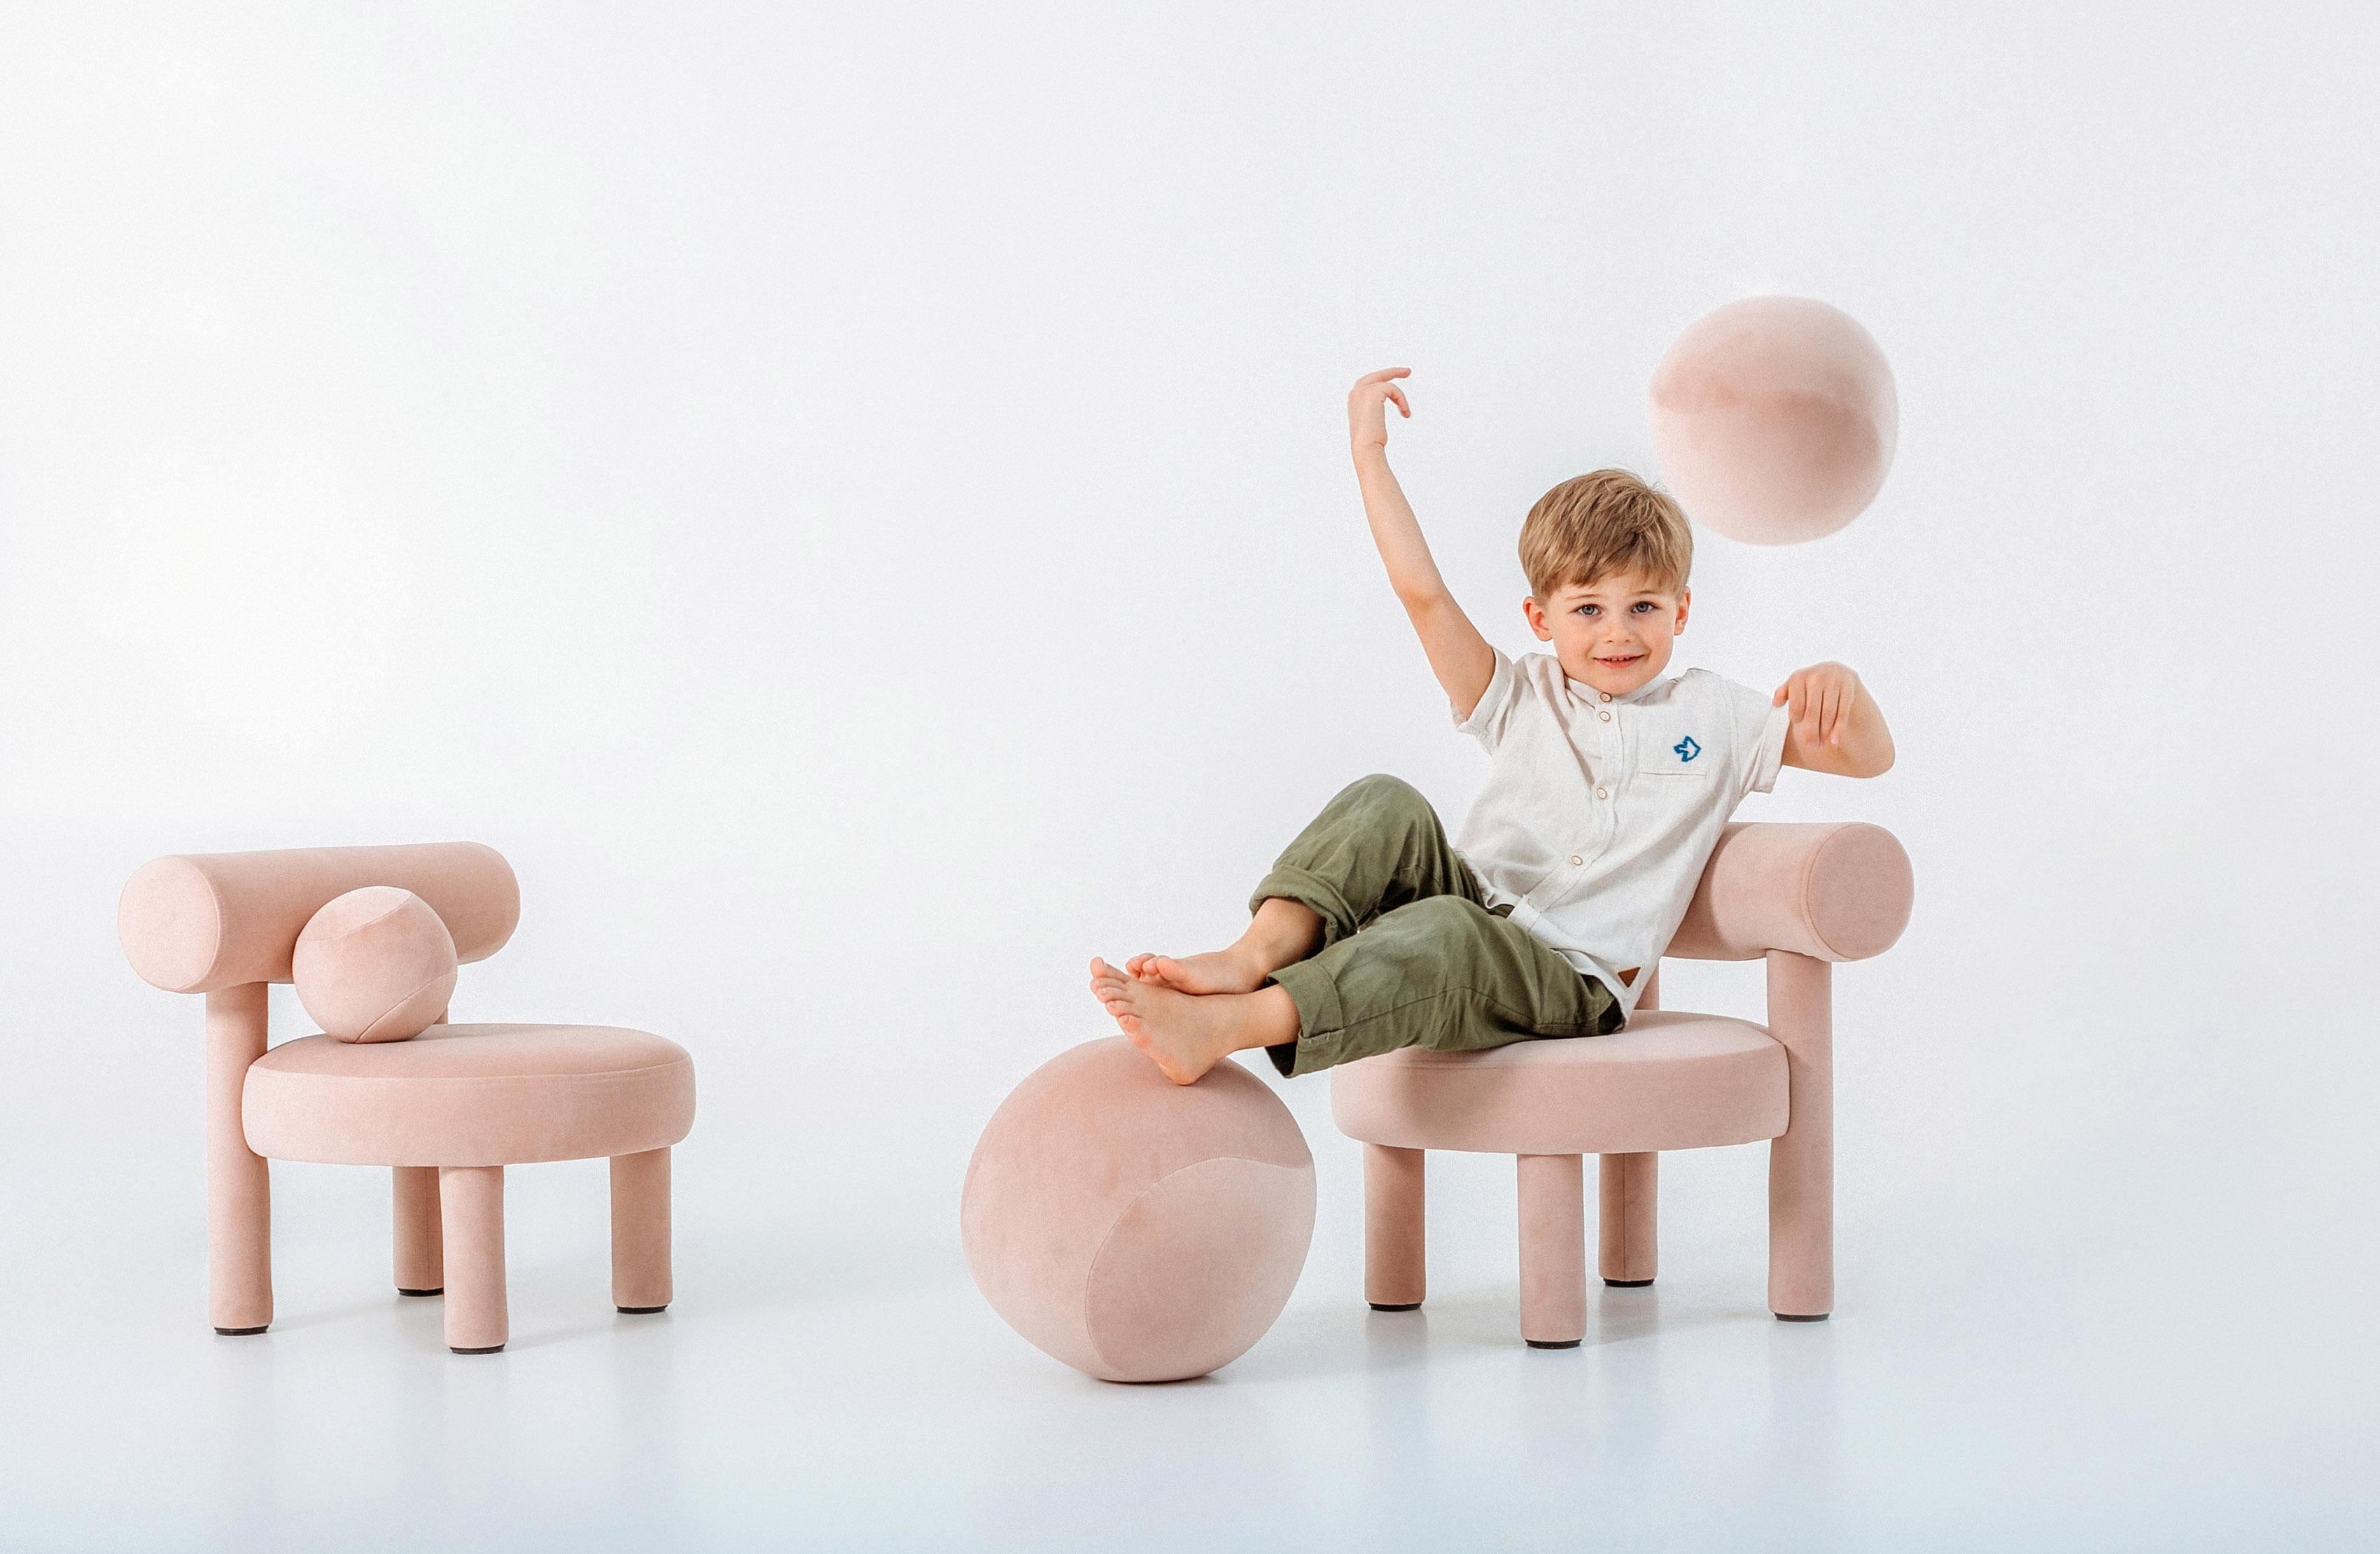 Baby Gropius chair collection is designed in the same spirit as the collection's flagman Gropius chair, which makes the brand signature.
We noted that kids love minimalist design and are always happy to interact with our chairs, and this fact